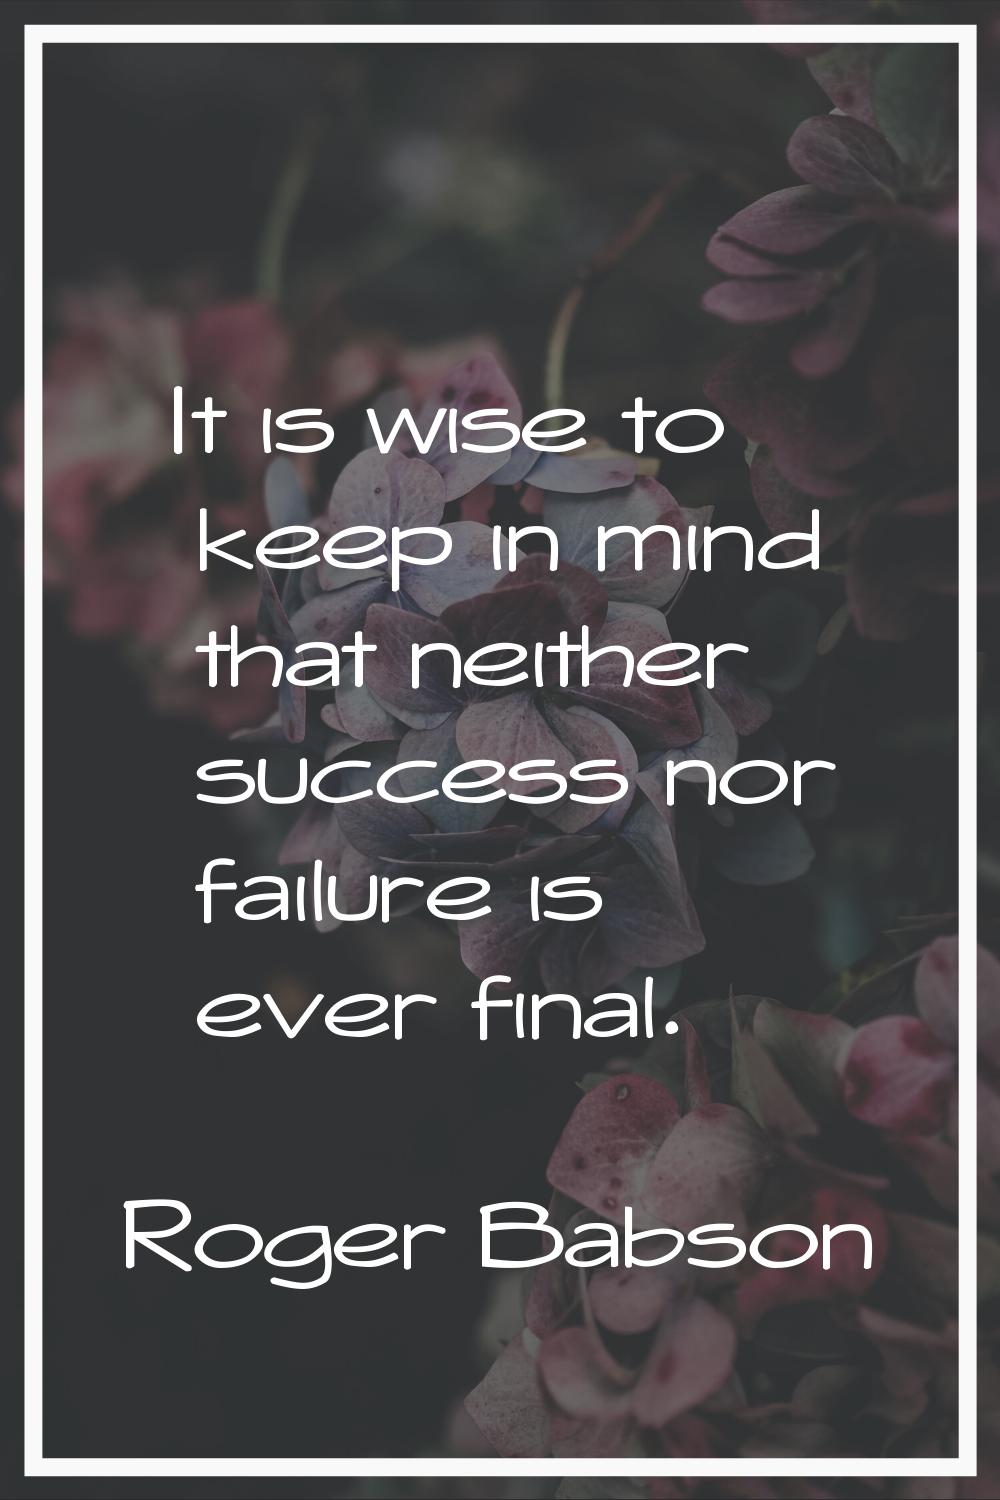 It is wise to keep in mind that neither success nor failure is ever final.